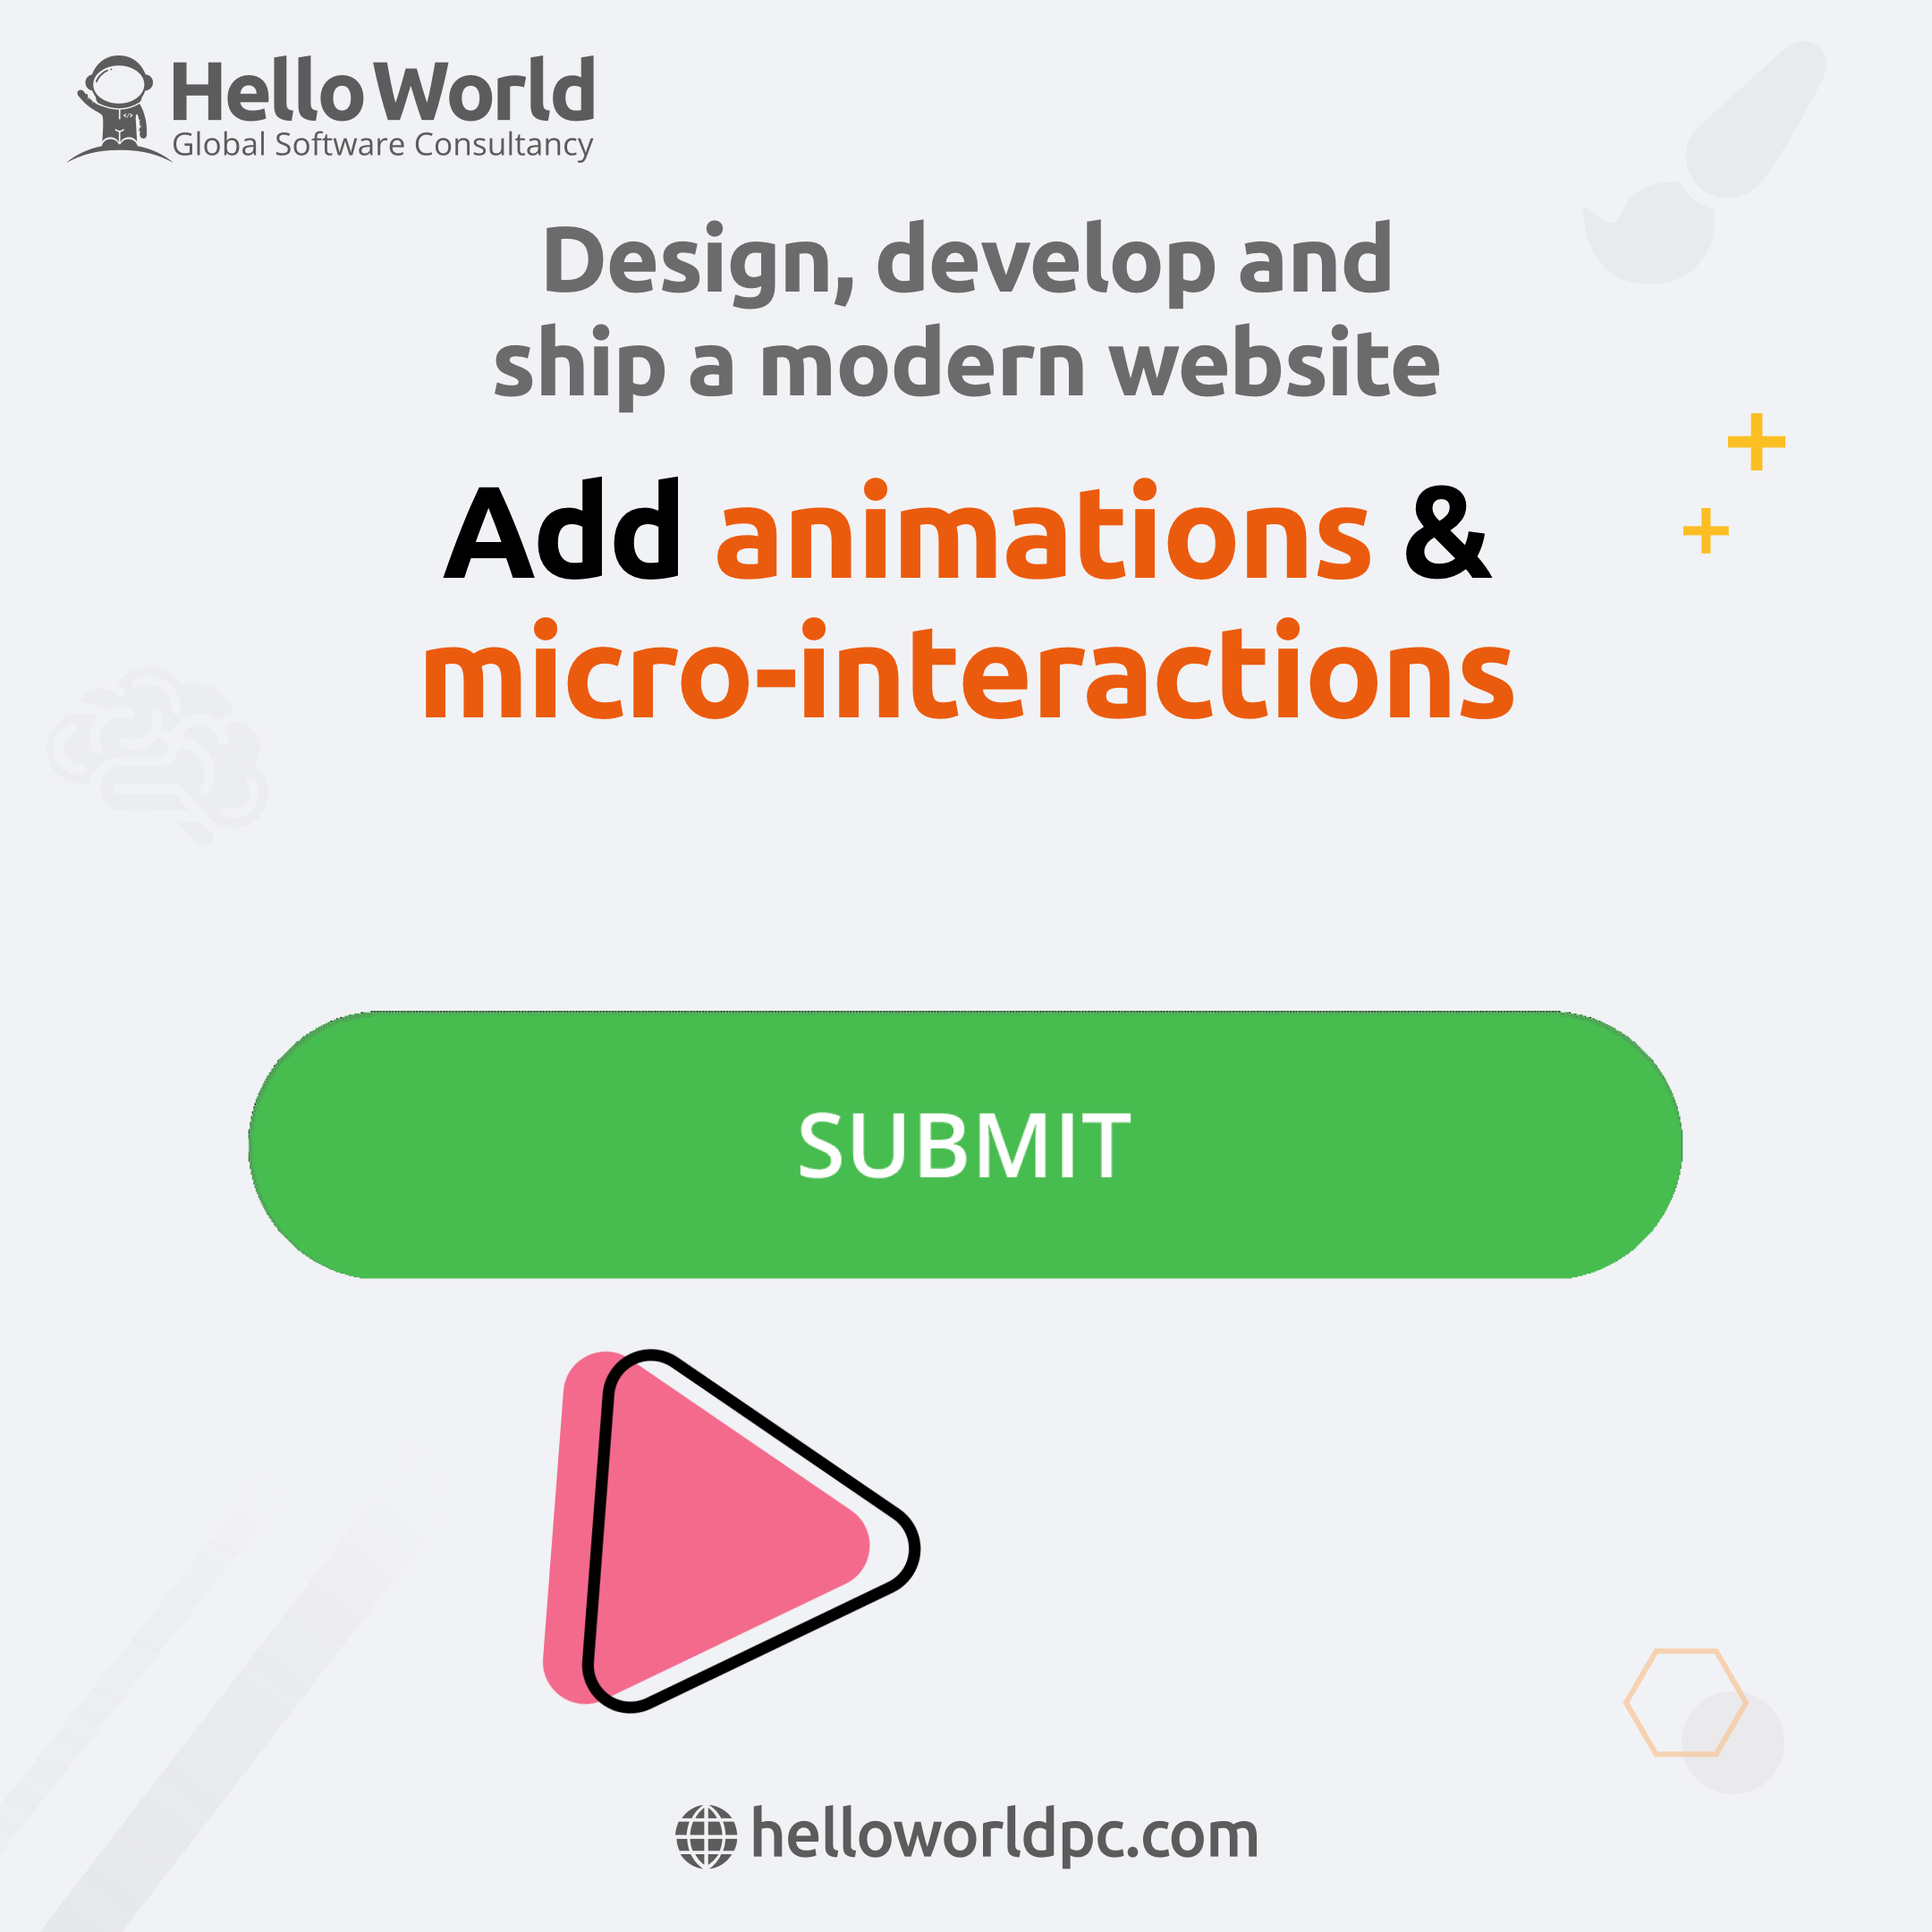 Modern Website: Add animations & micro-interactions